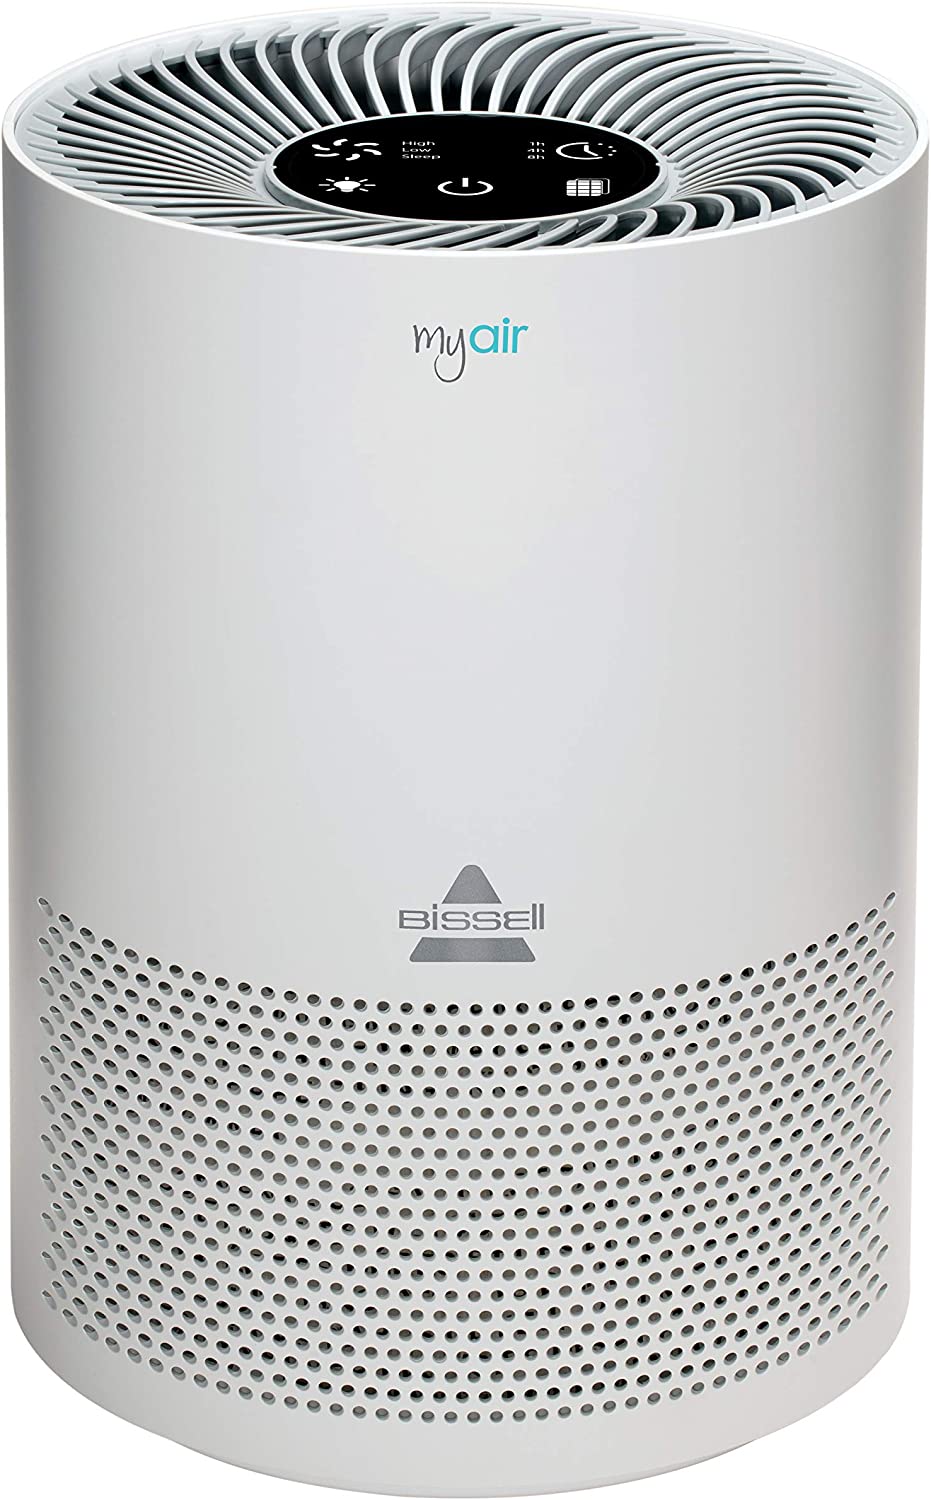  10. BISSELL MYair Smart Air Purifier with Carbon Filter for Small Room and Home 